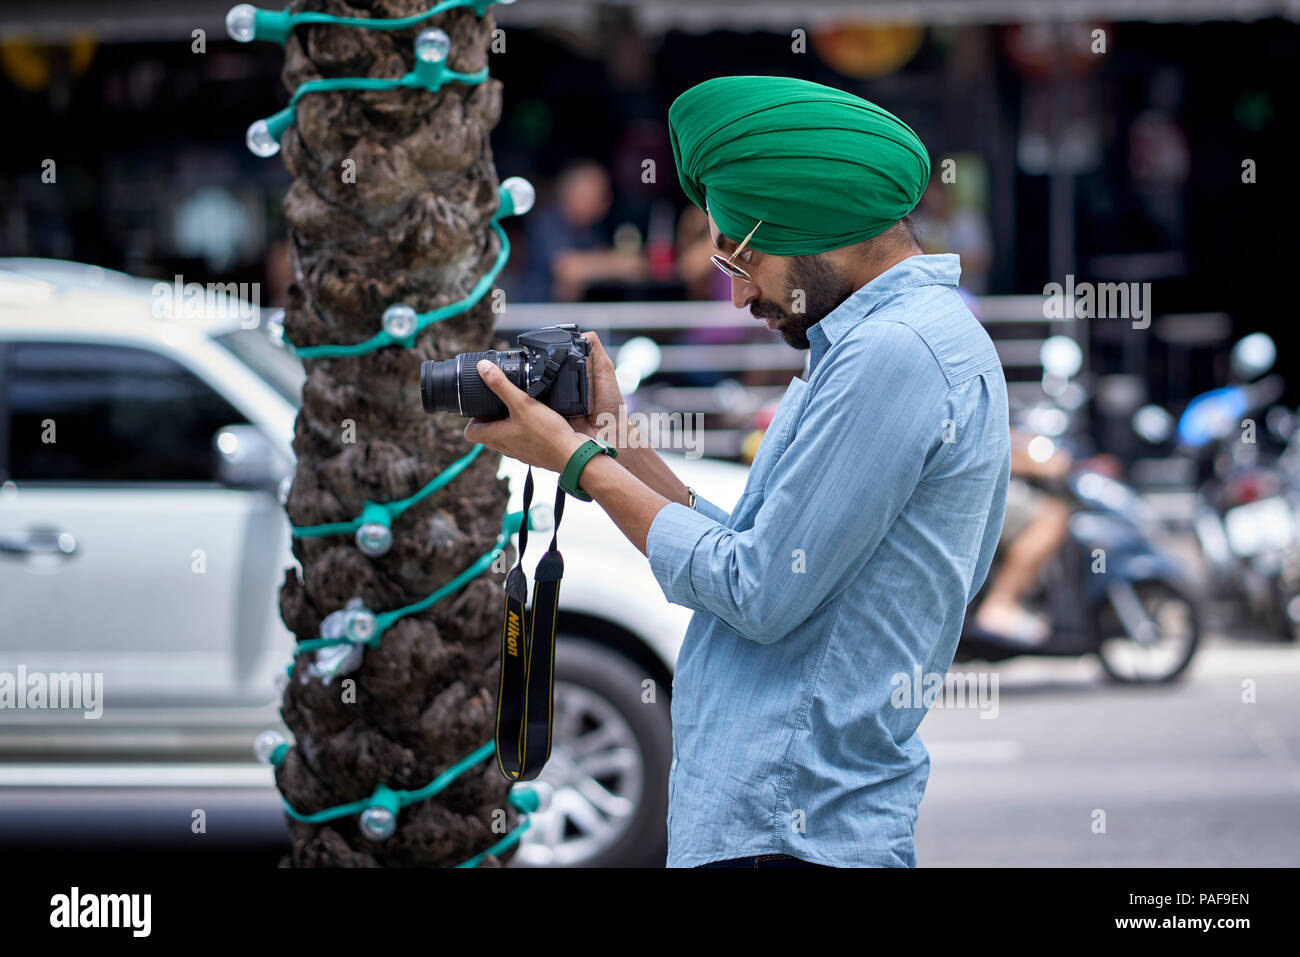 Indian Sikh man taking a photograph using the camera LCD screen Stock Photo